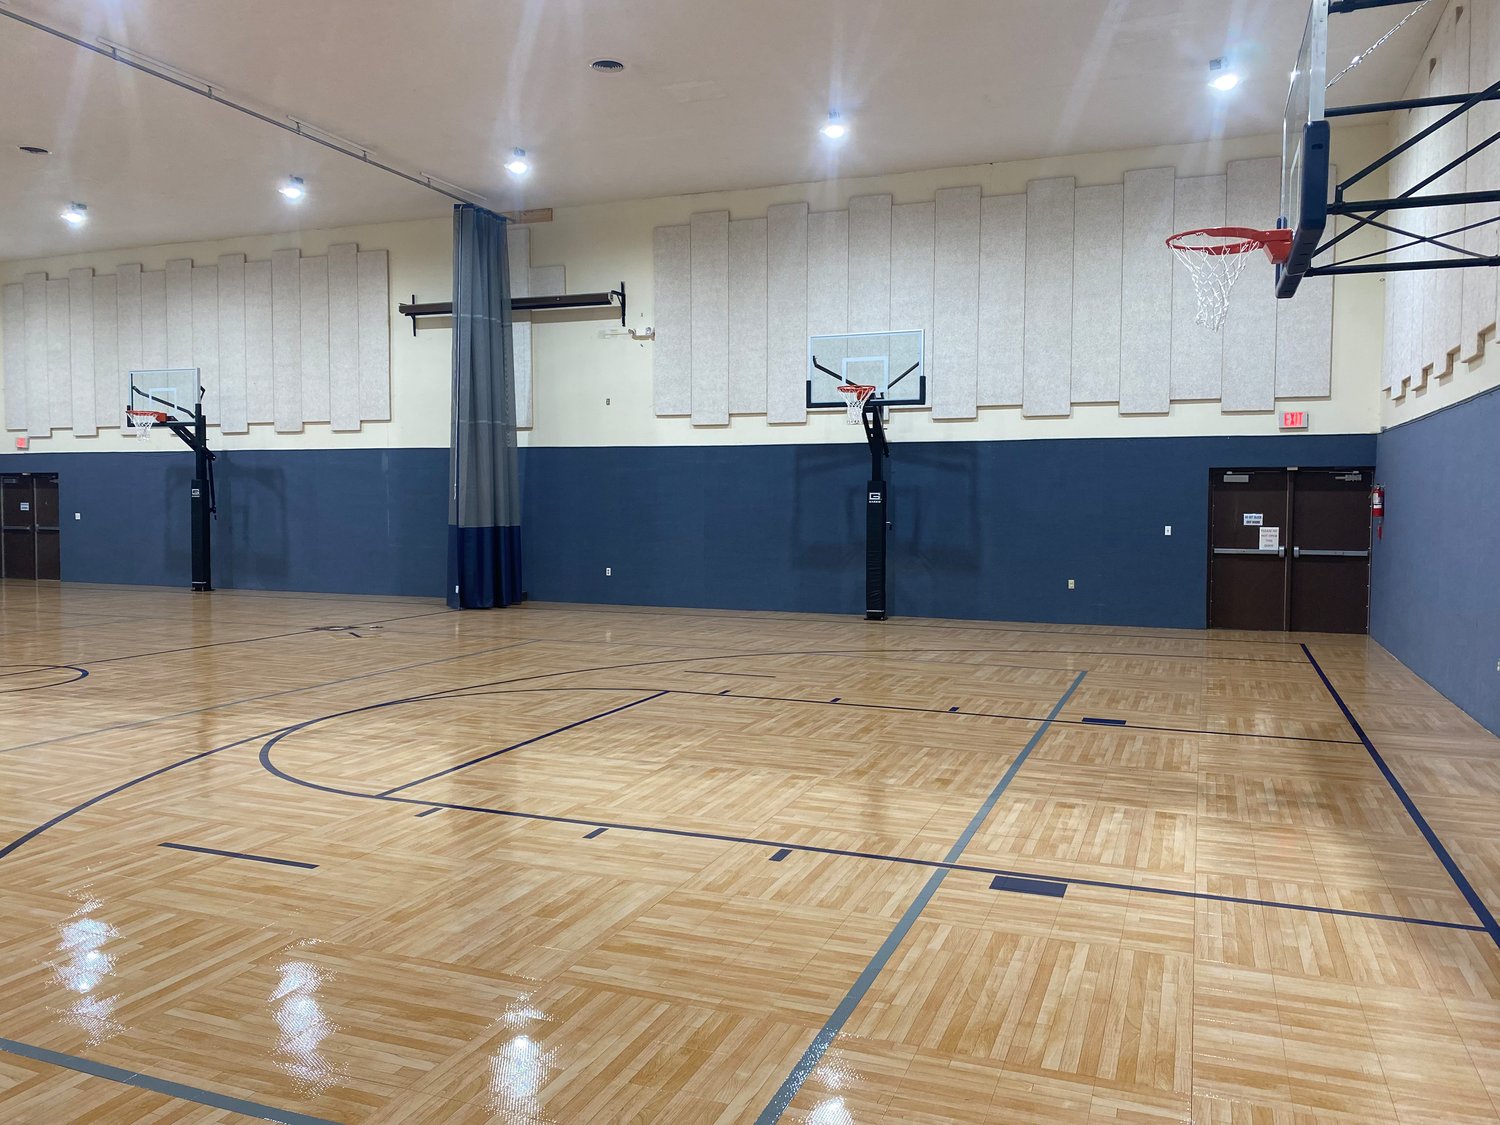 The new gym at New Hope Christian Church is starting to take shape as it gets ready for its youth league this Spring.